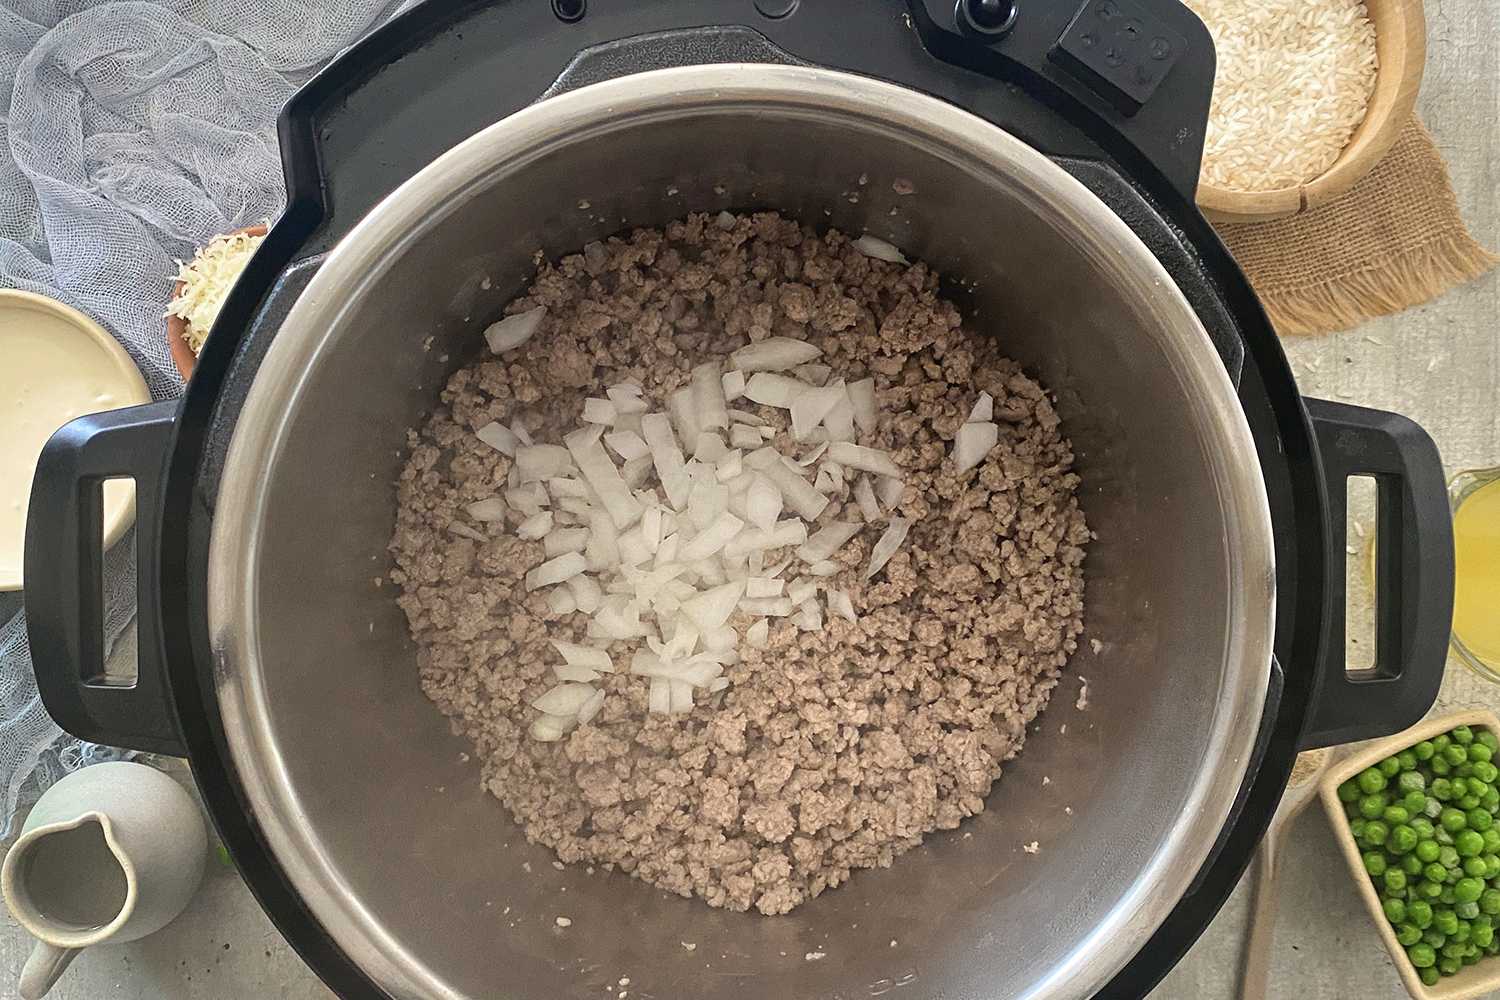 Instant Pot Ground Beef and Rice